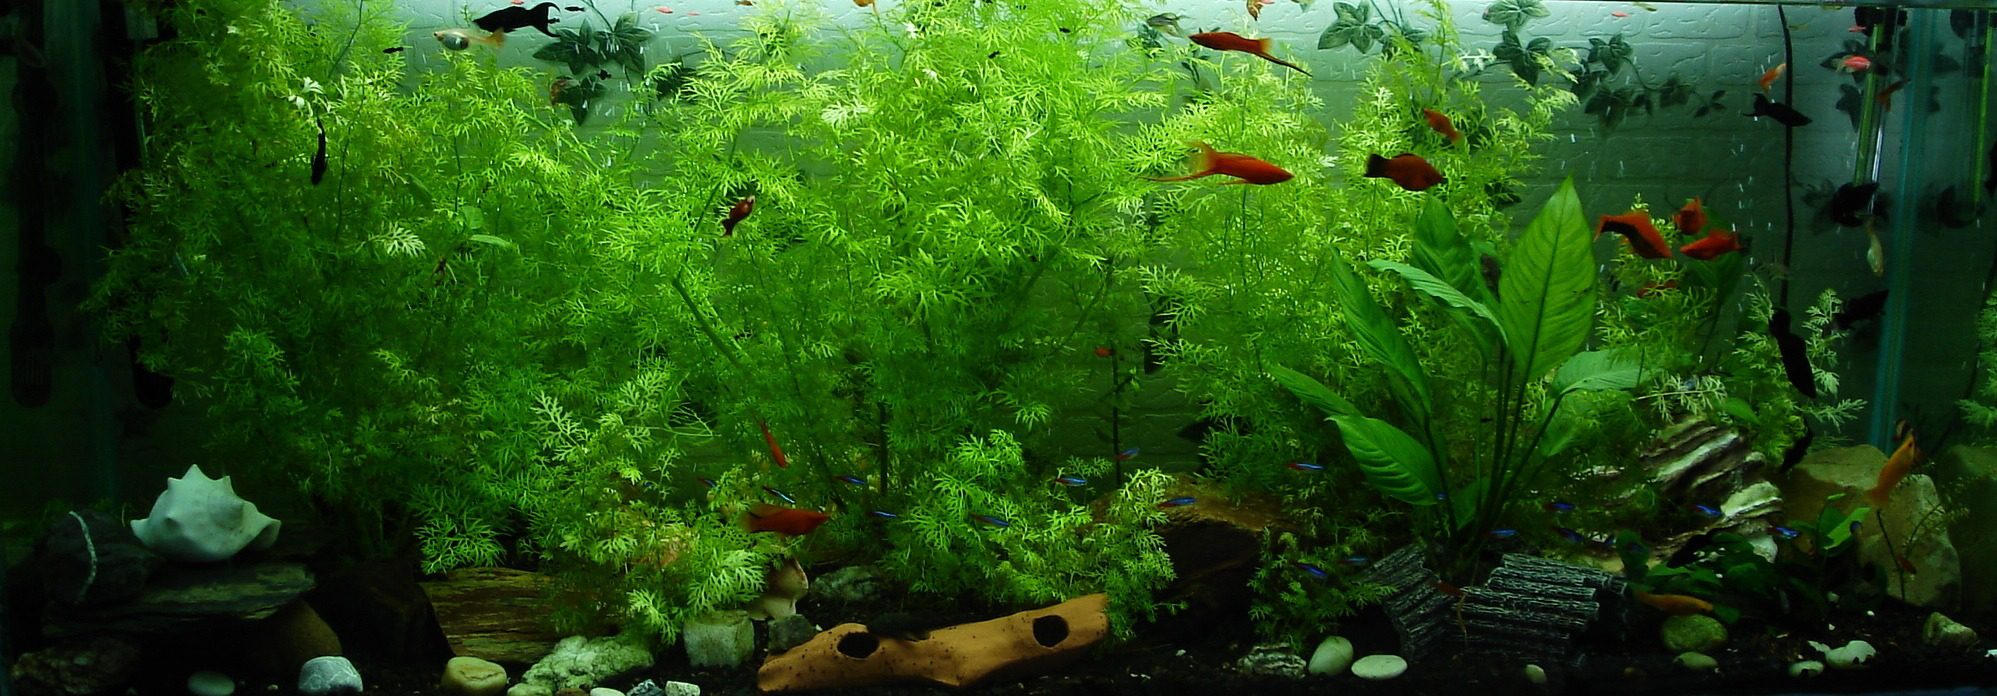 5 Tips for Cleaning and Maintaining a Home Aquarium